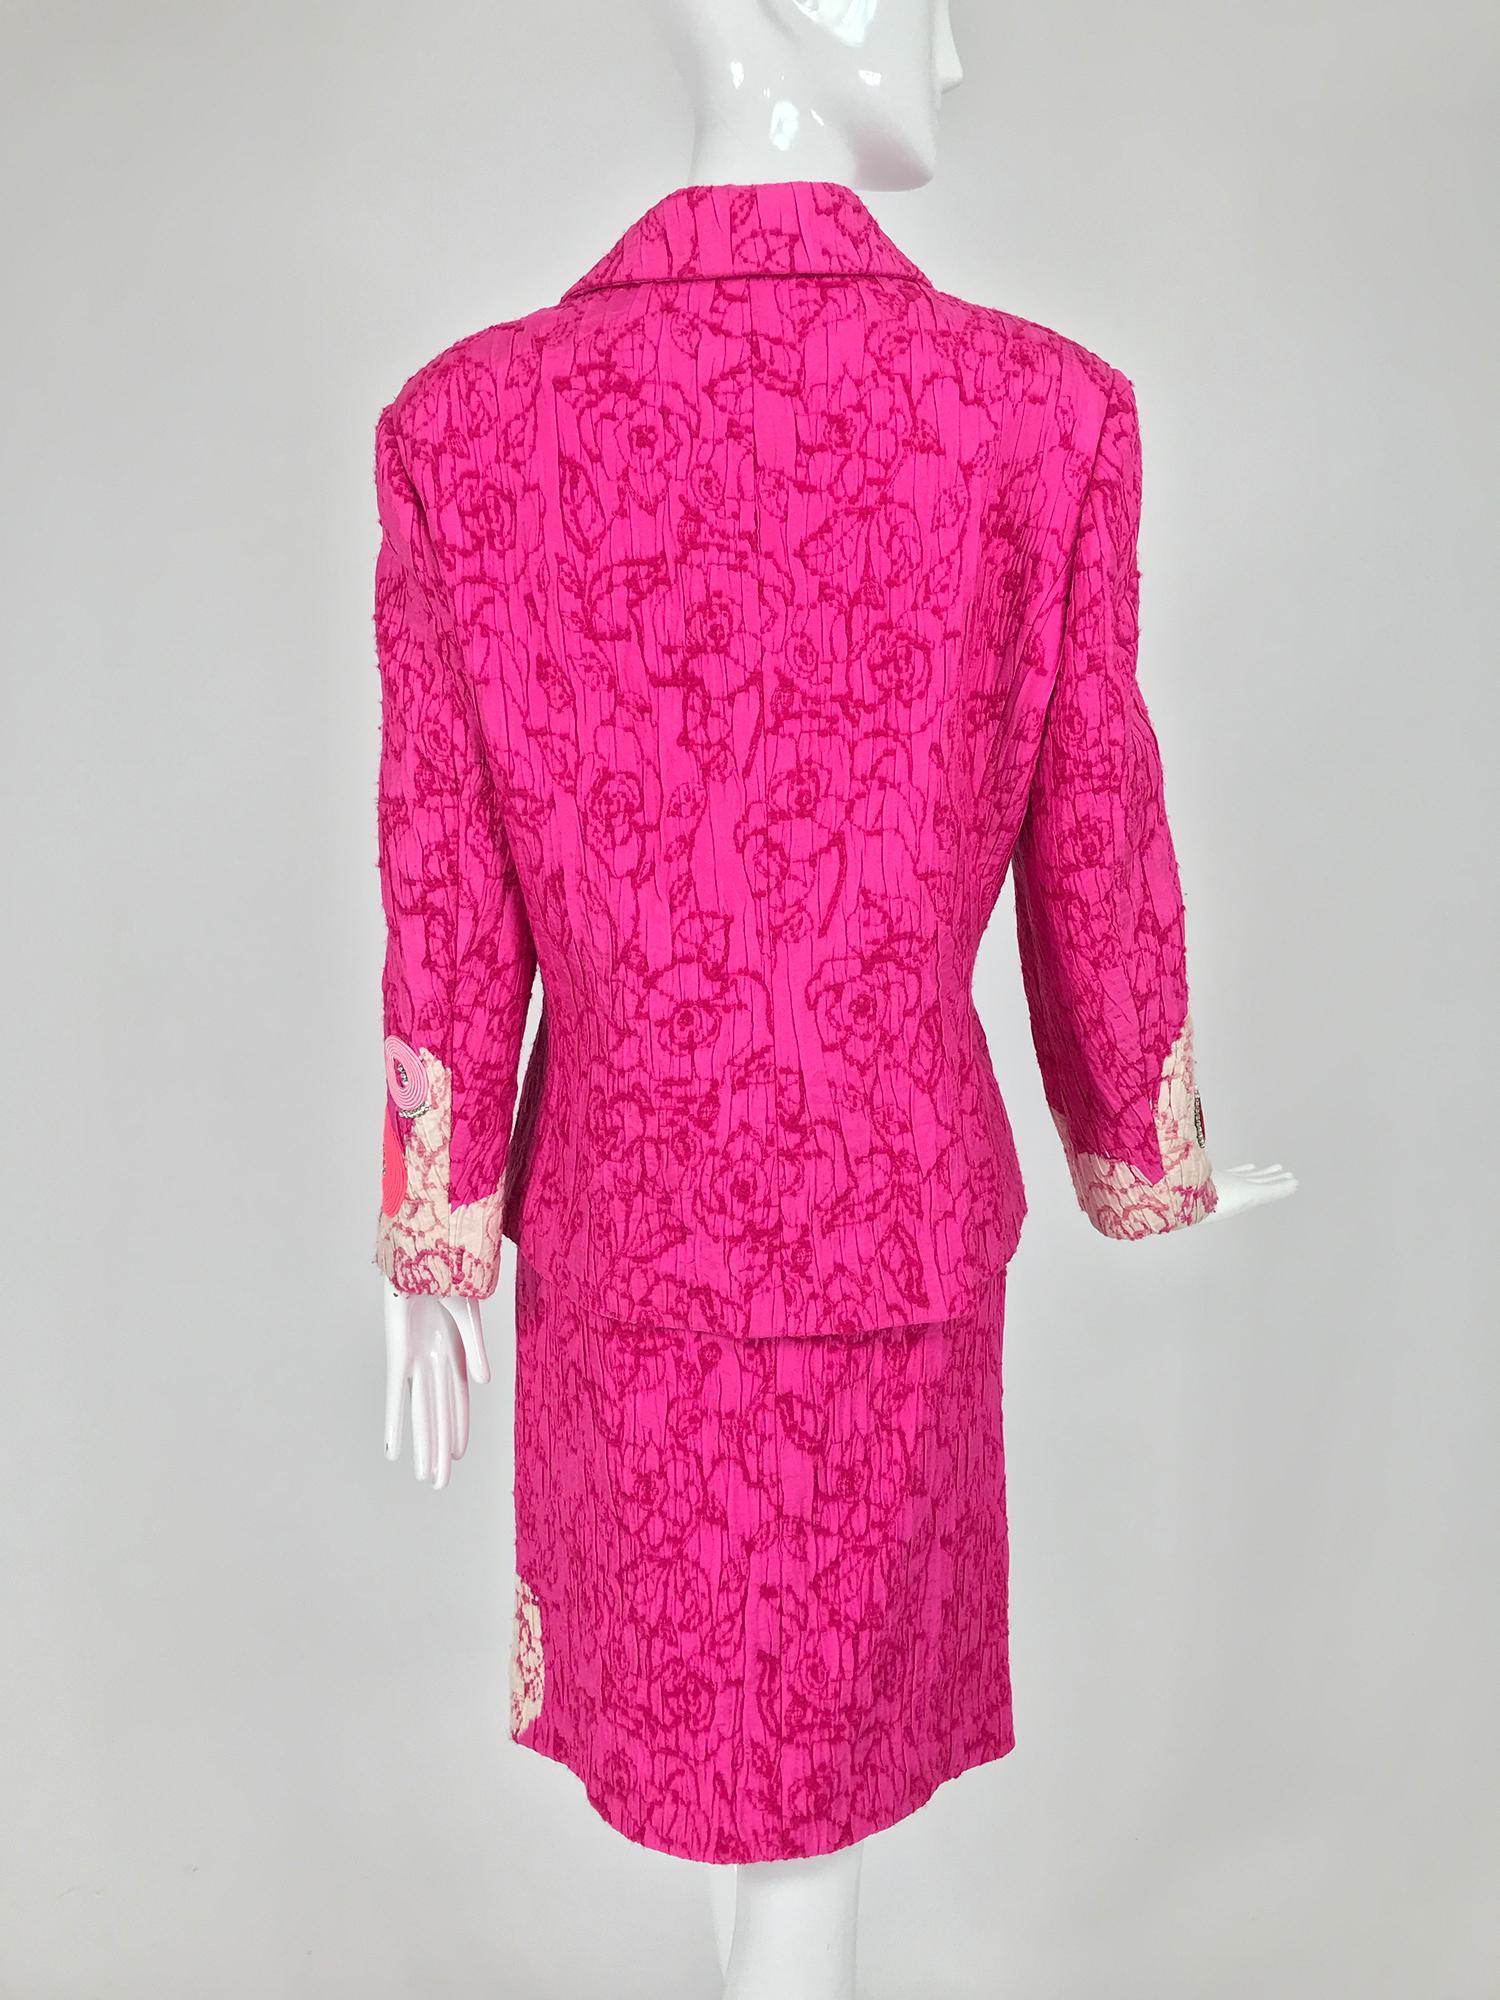 Christian Lacroix Pink Embroidered Silk Applique Skirt Suit 1990s For Sale 4